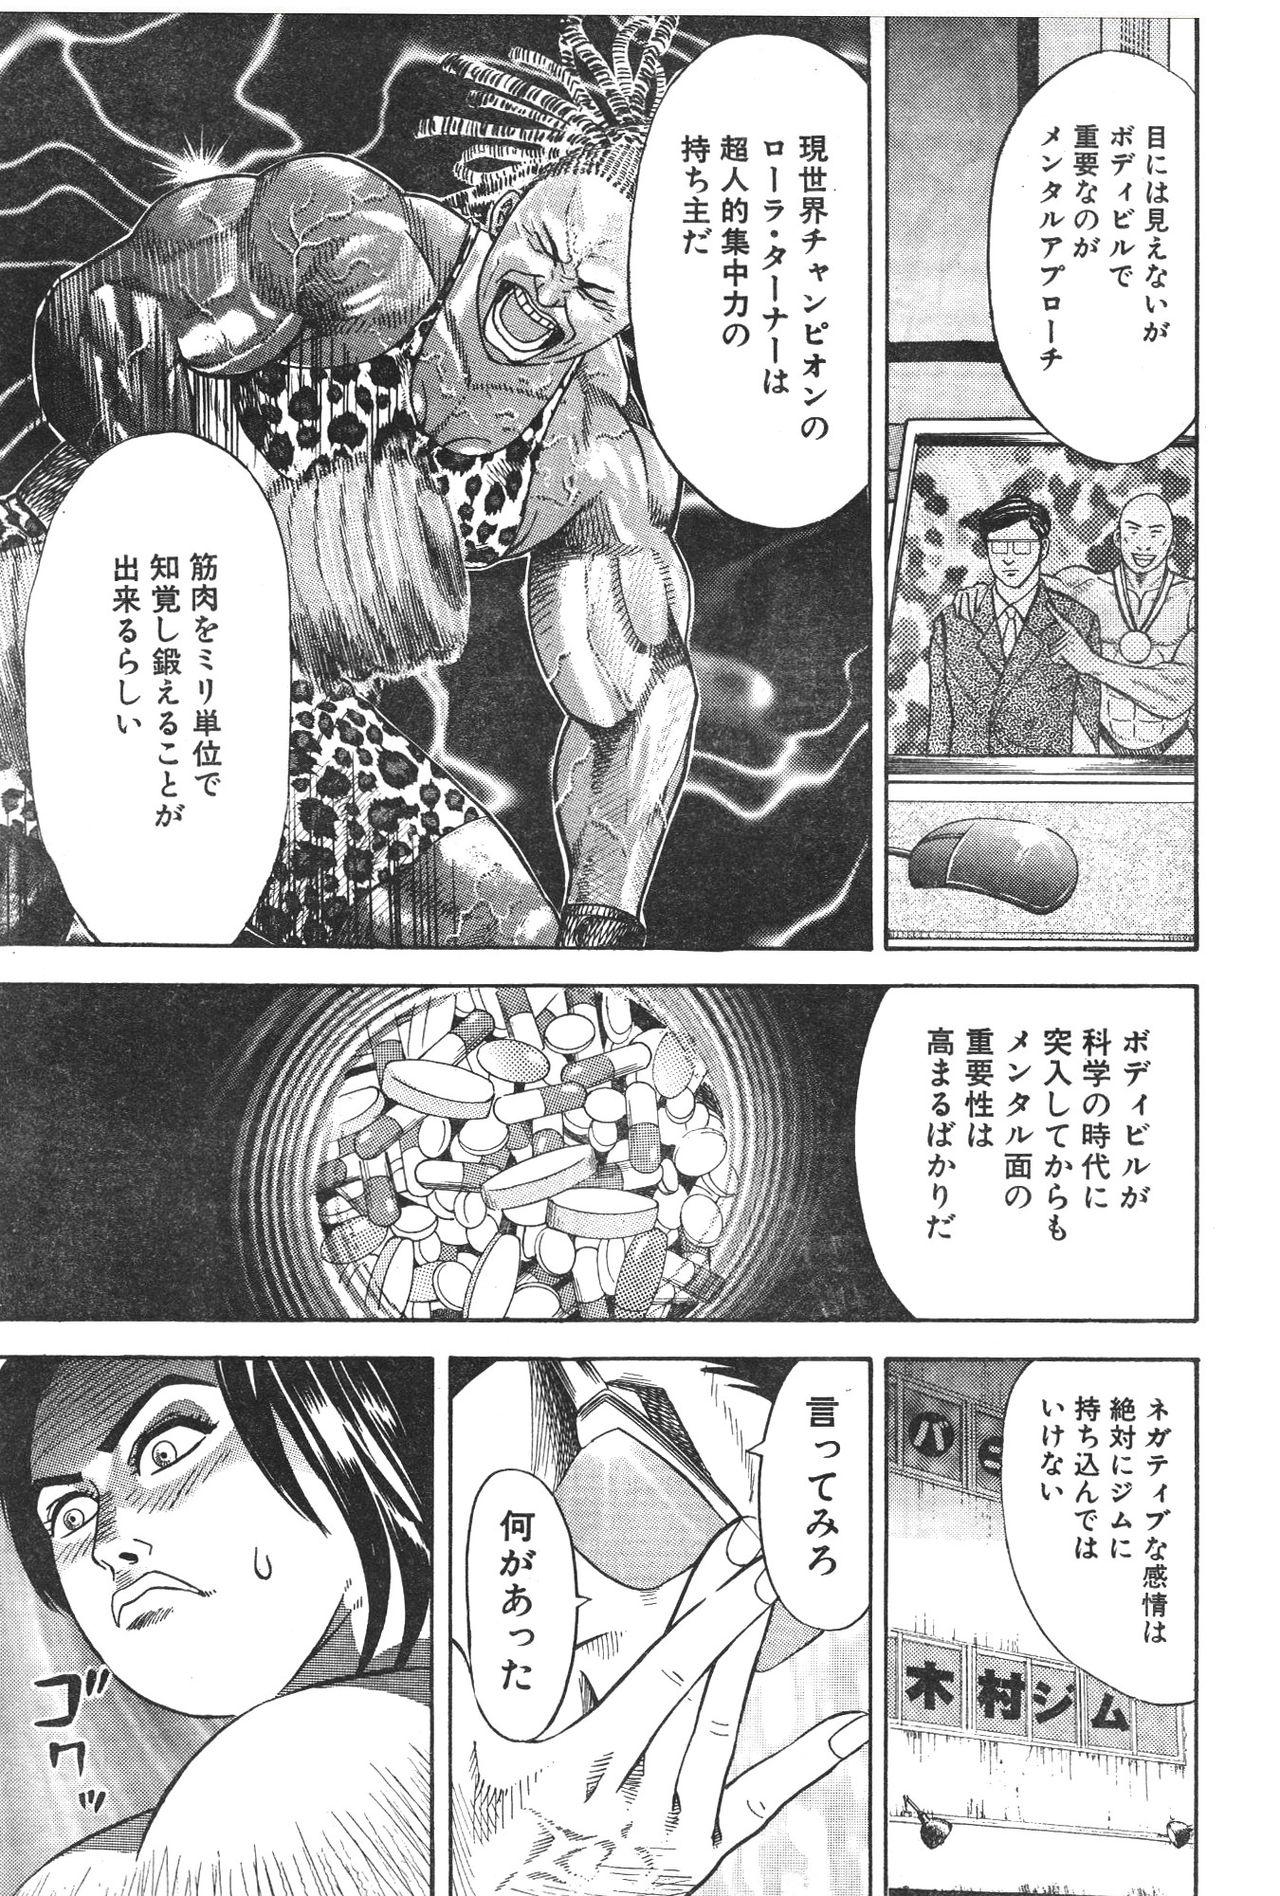 Muscle Strawberry Chapter 1 18